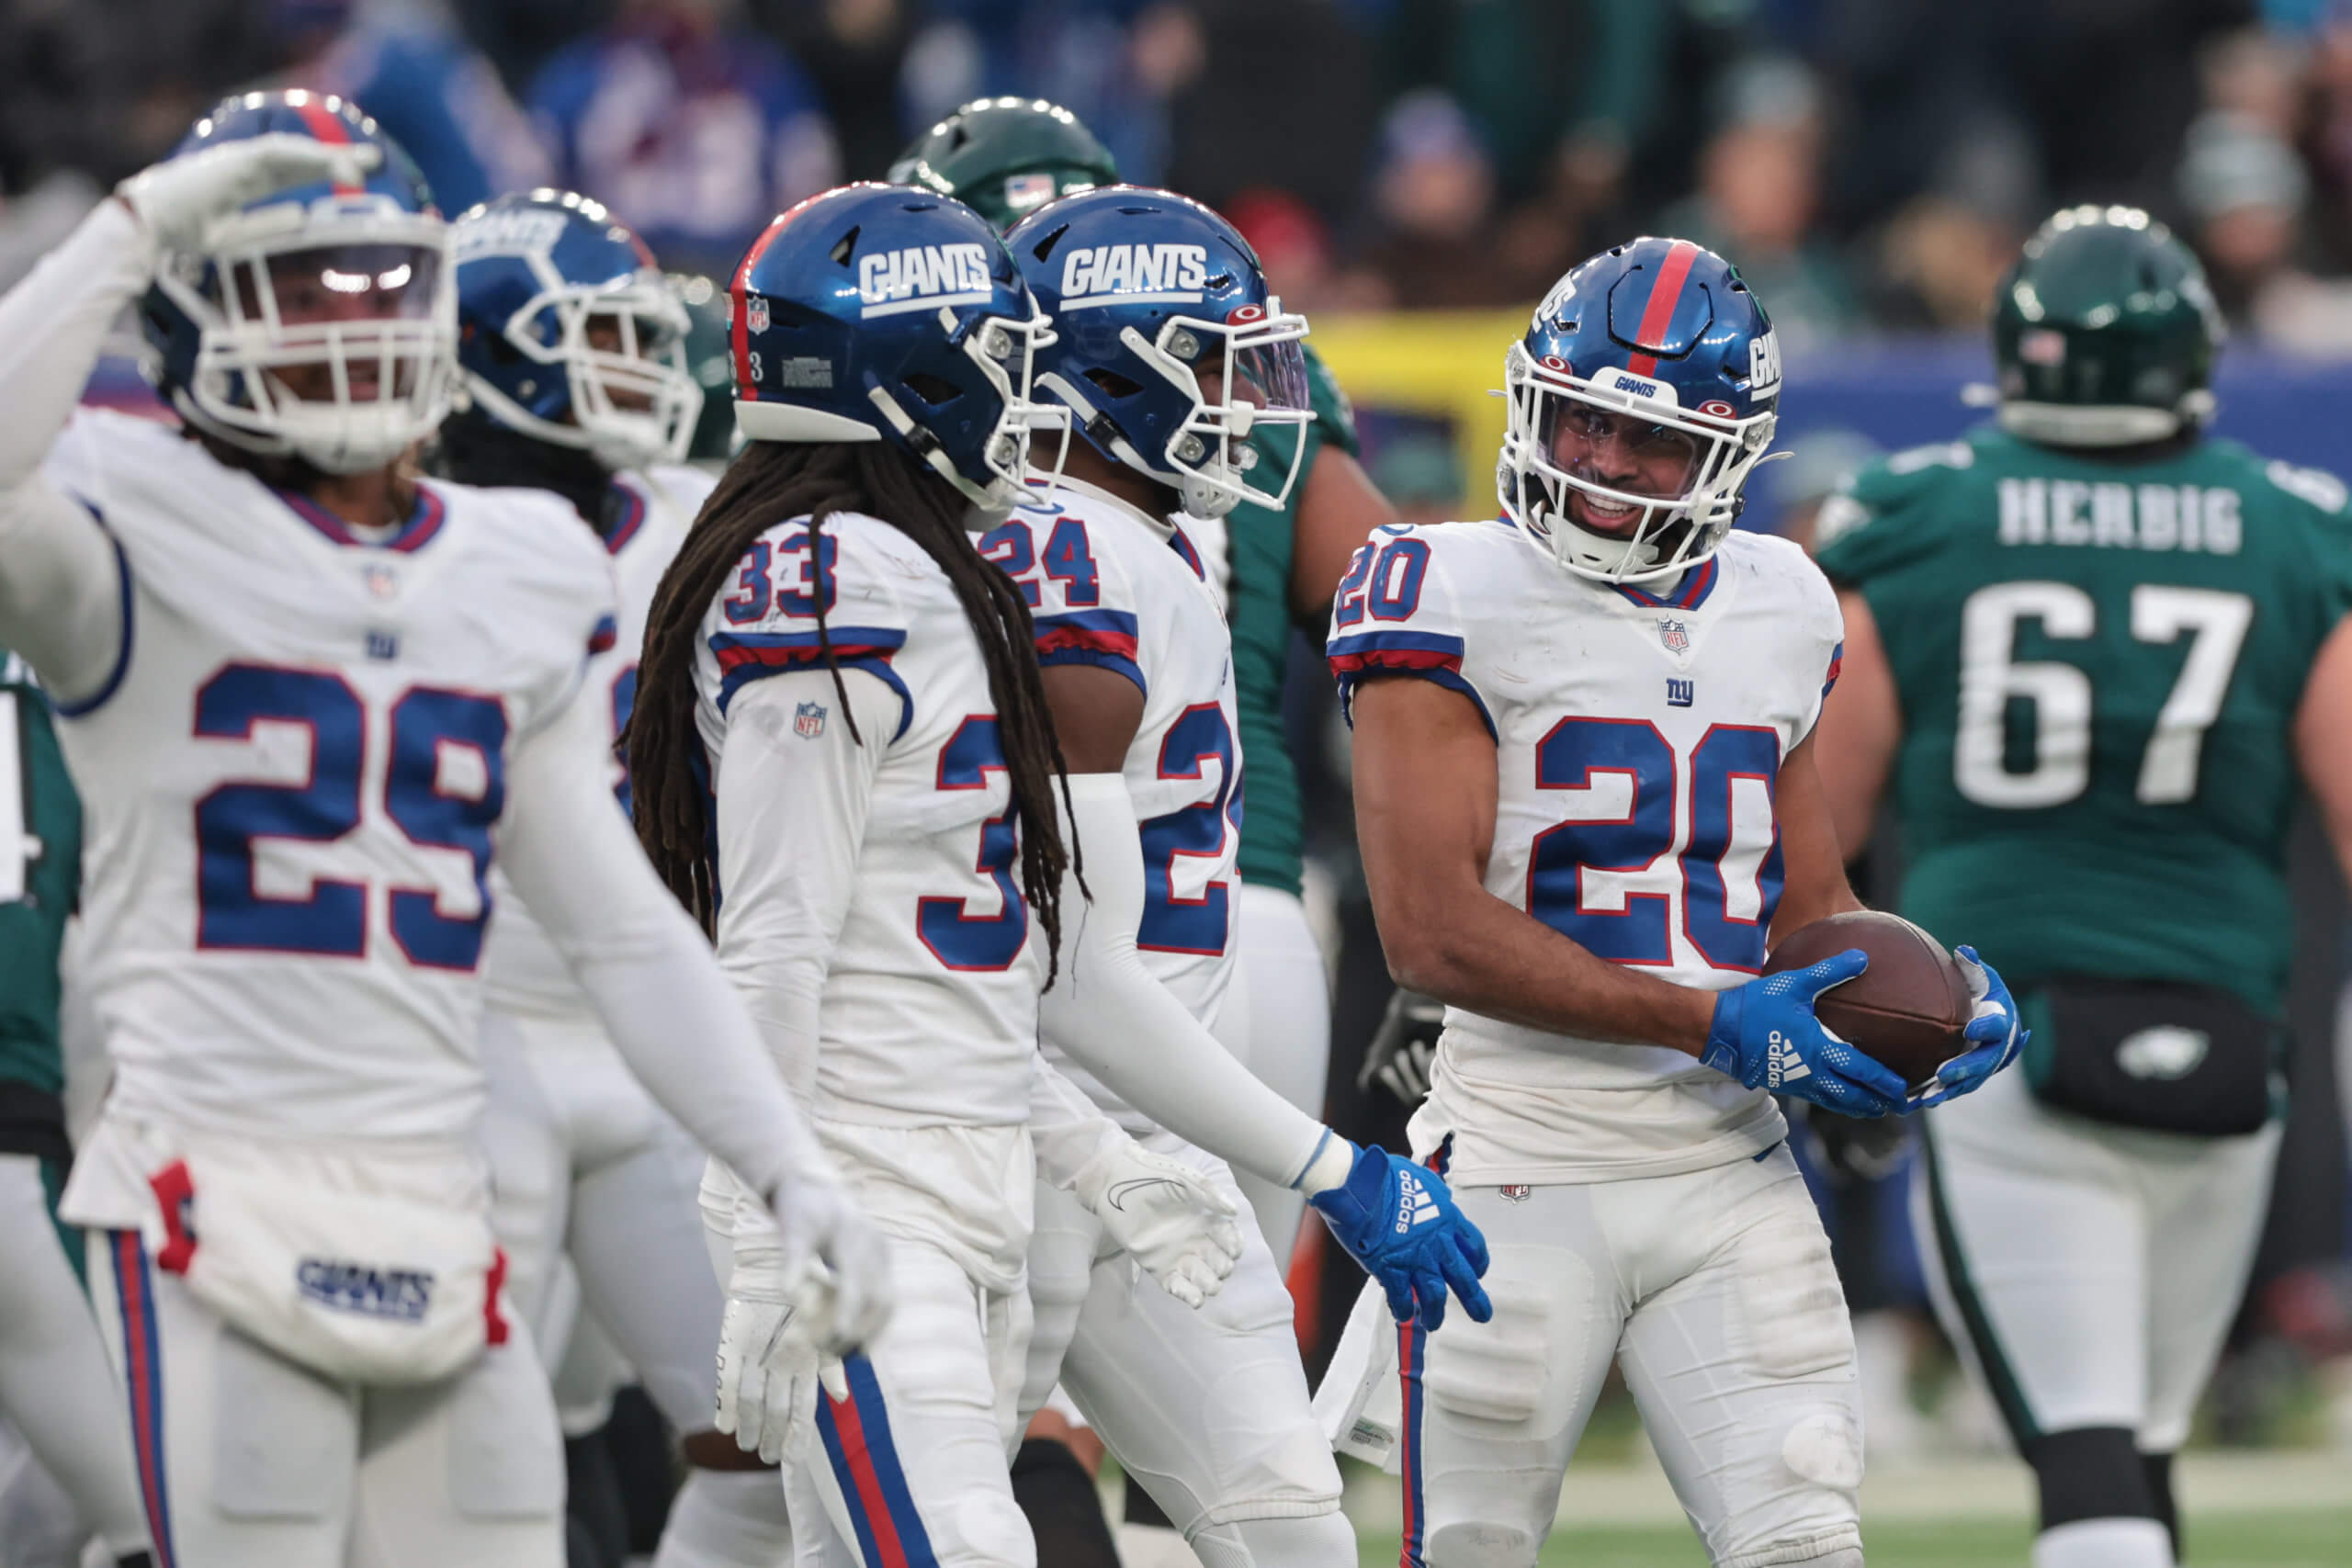 We needed it bad': Giants reflect on strong defensive effort in win over  Eagles